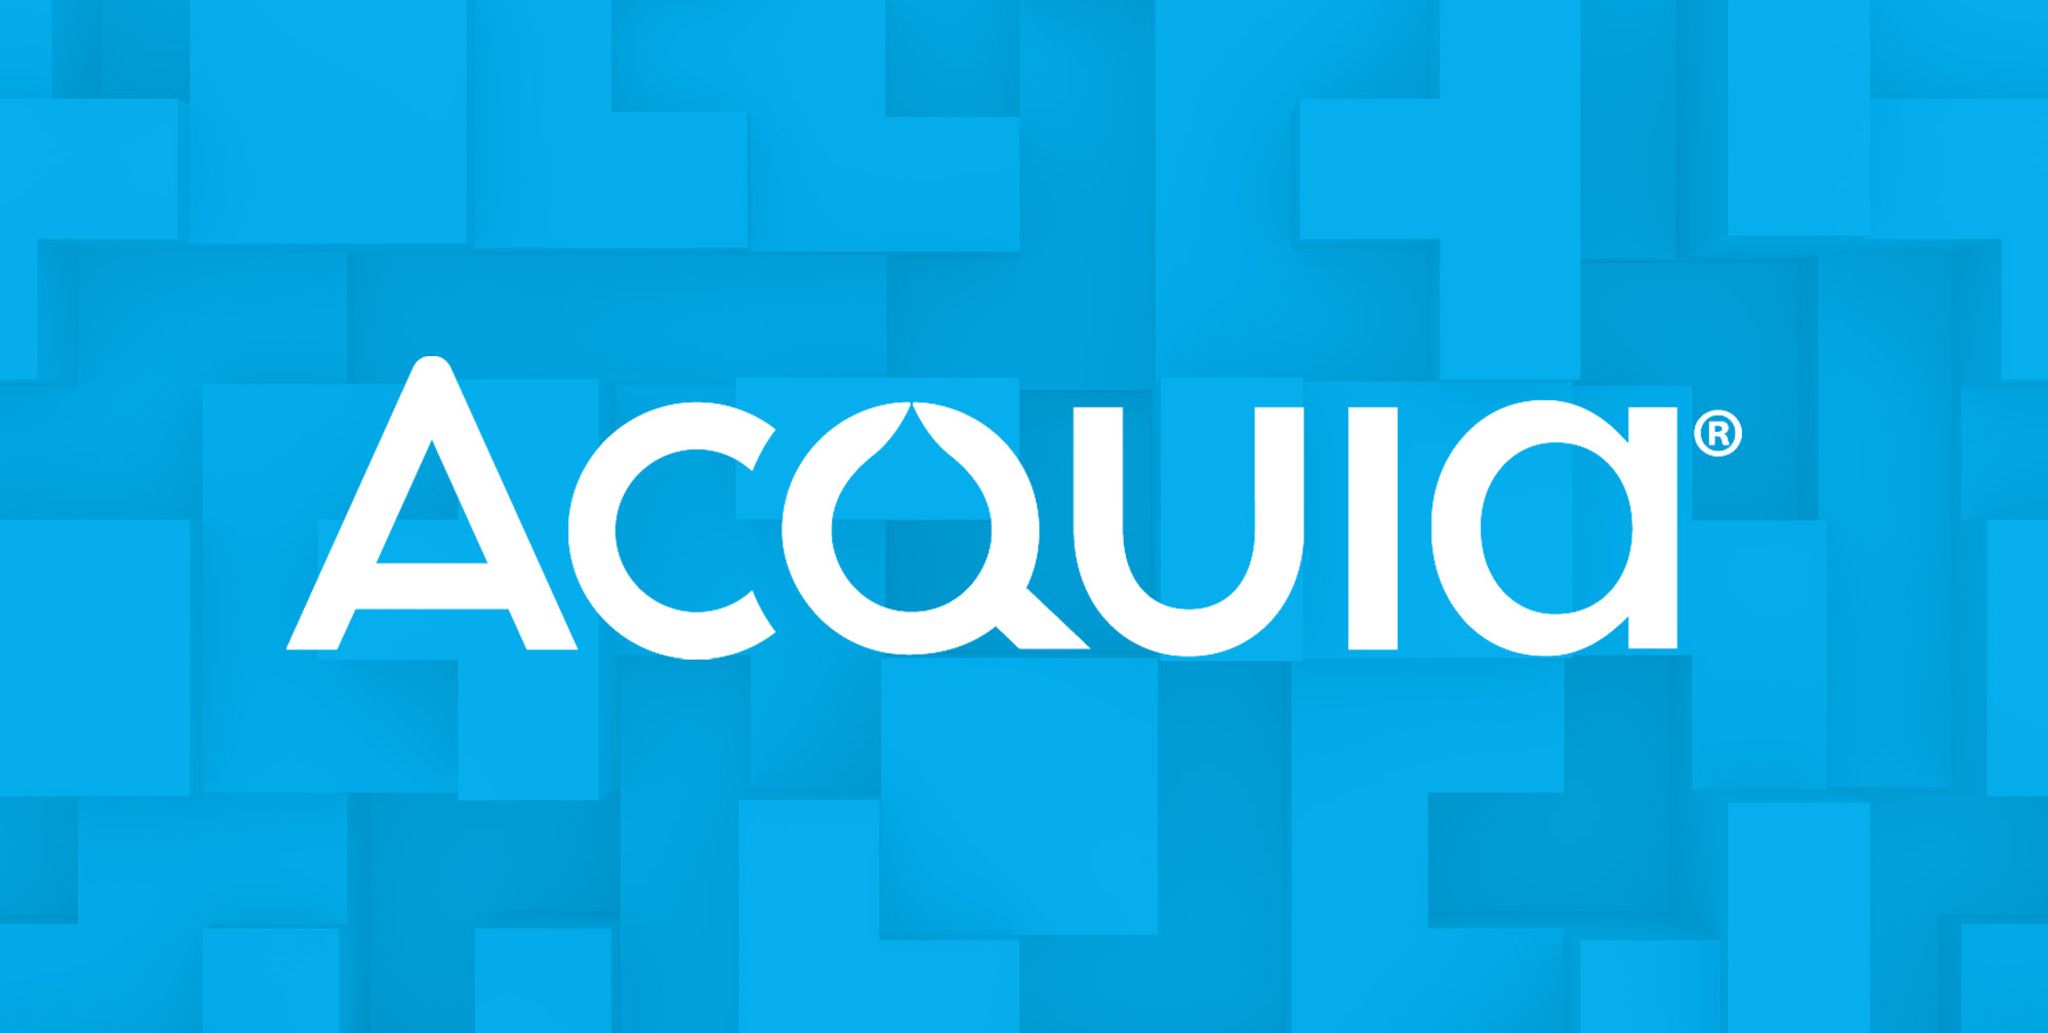 Acquia logo against a composite background of Tetris-like pieces fitting together, reinforcing the concept of composable DXP